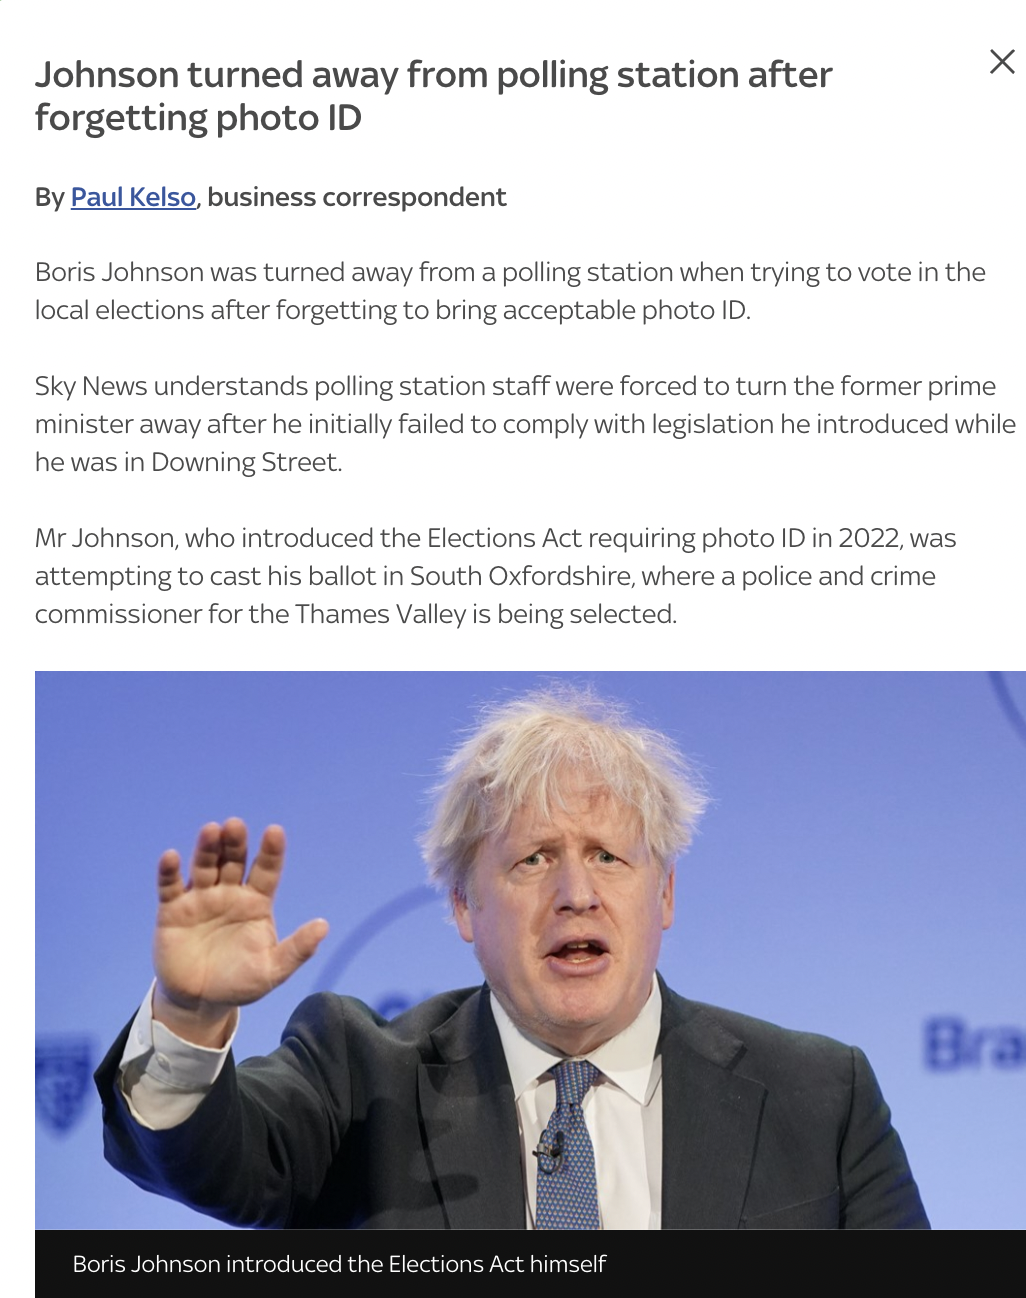 public speaking - Johnson turned away from polling station after forgetting photo Id By Paul Kelso, business correspondent Boris Johnson was turned away from a polling station when trying to vote in the local elections after forgetting to bring acceptable